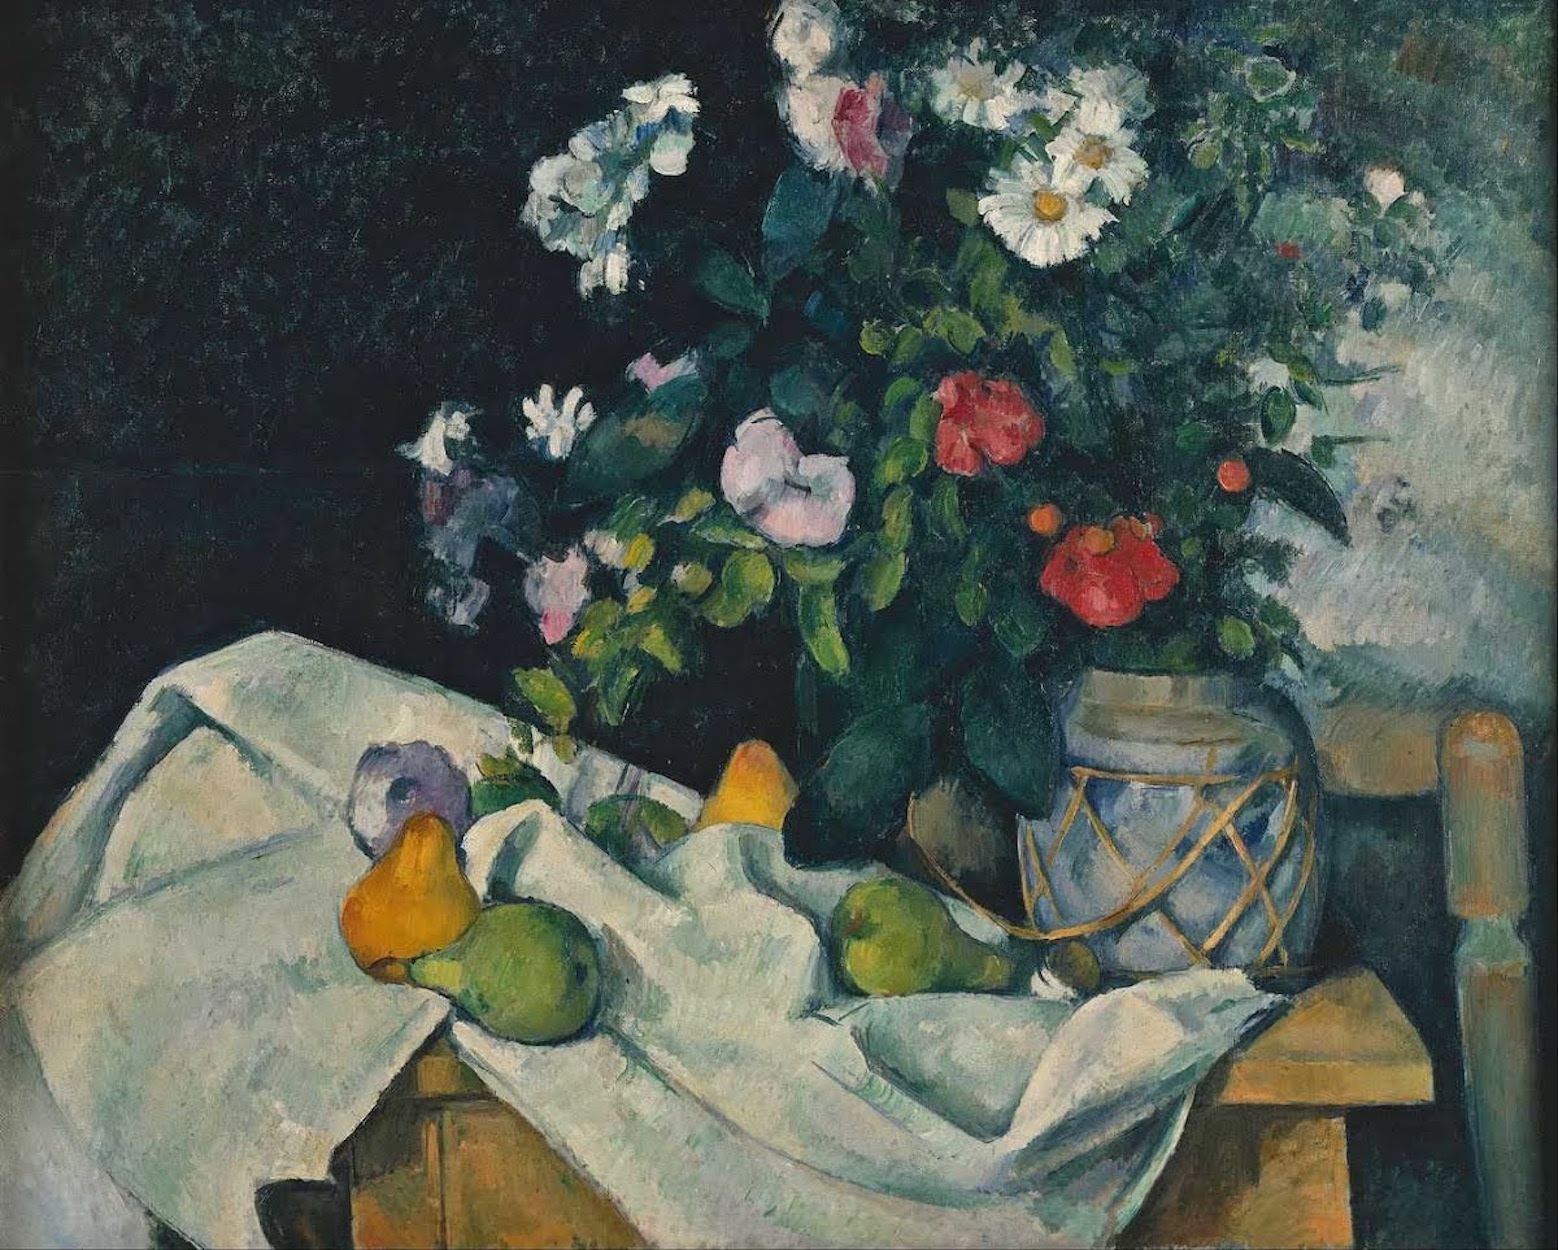 Still Life with Flowers and Fruit by Paul Cézanne - c. 1890 - 82.0 x 65.5 cm Alte Nationalgalerie